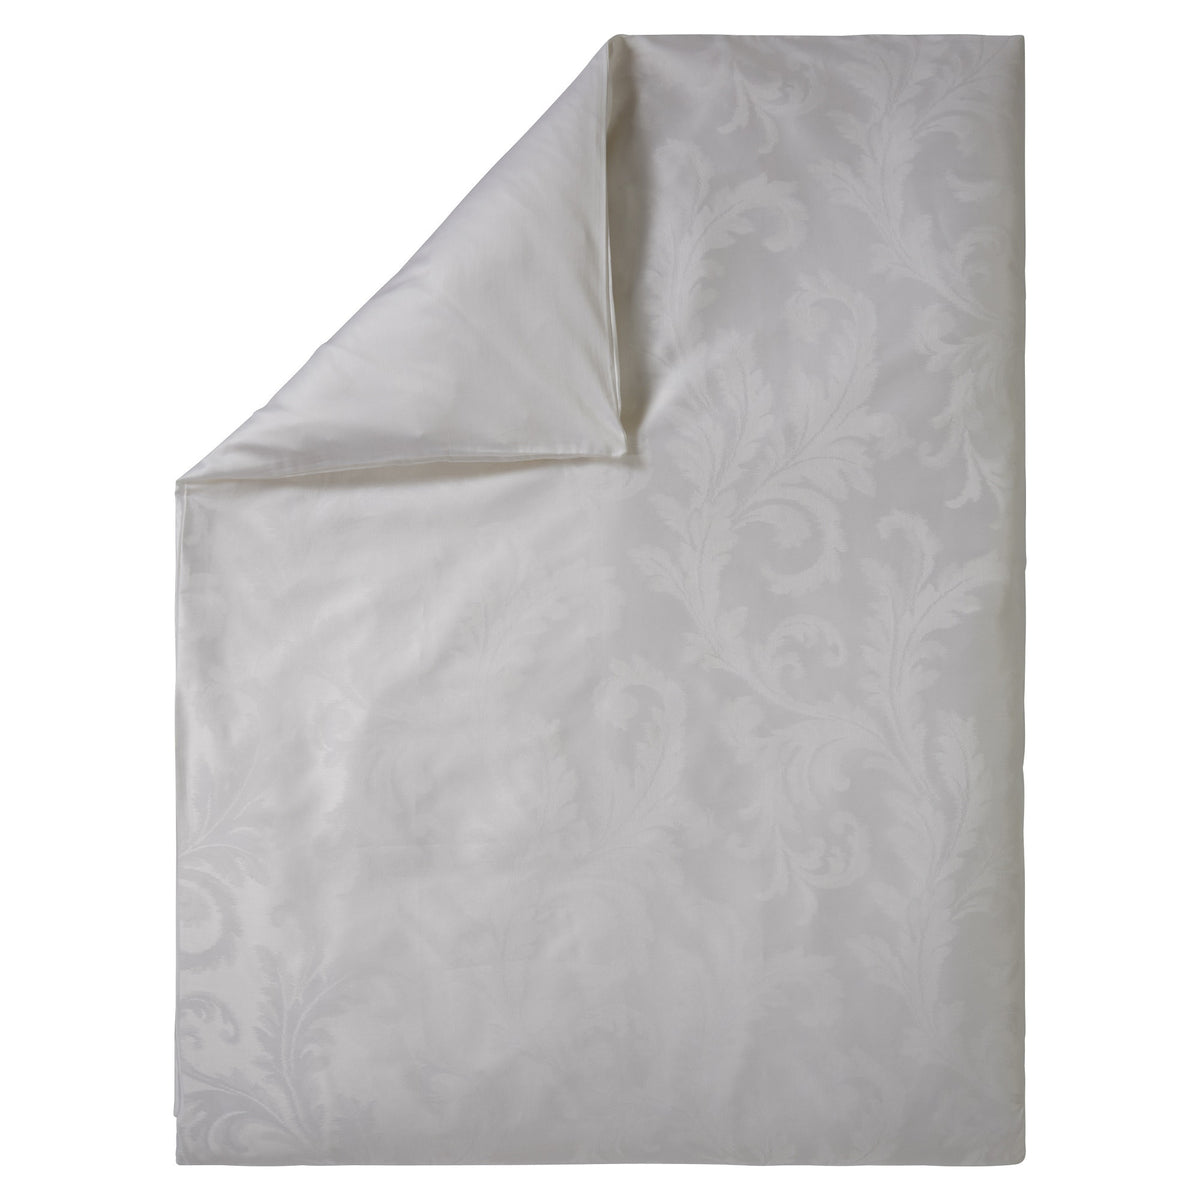 Swan by Yves Delorme ON SALE!!! - FIG LINENS AND HOME